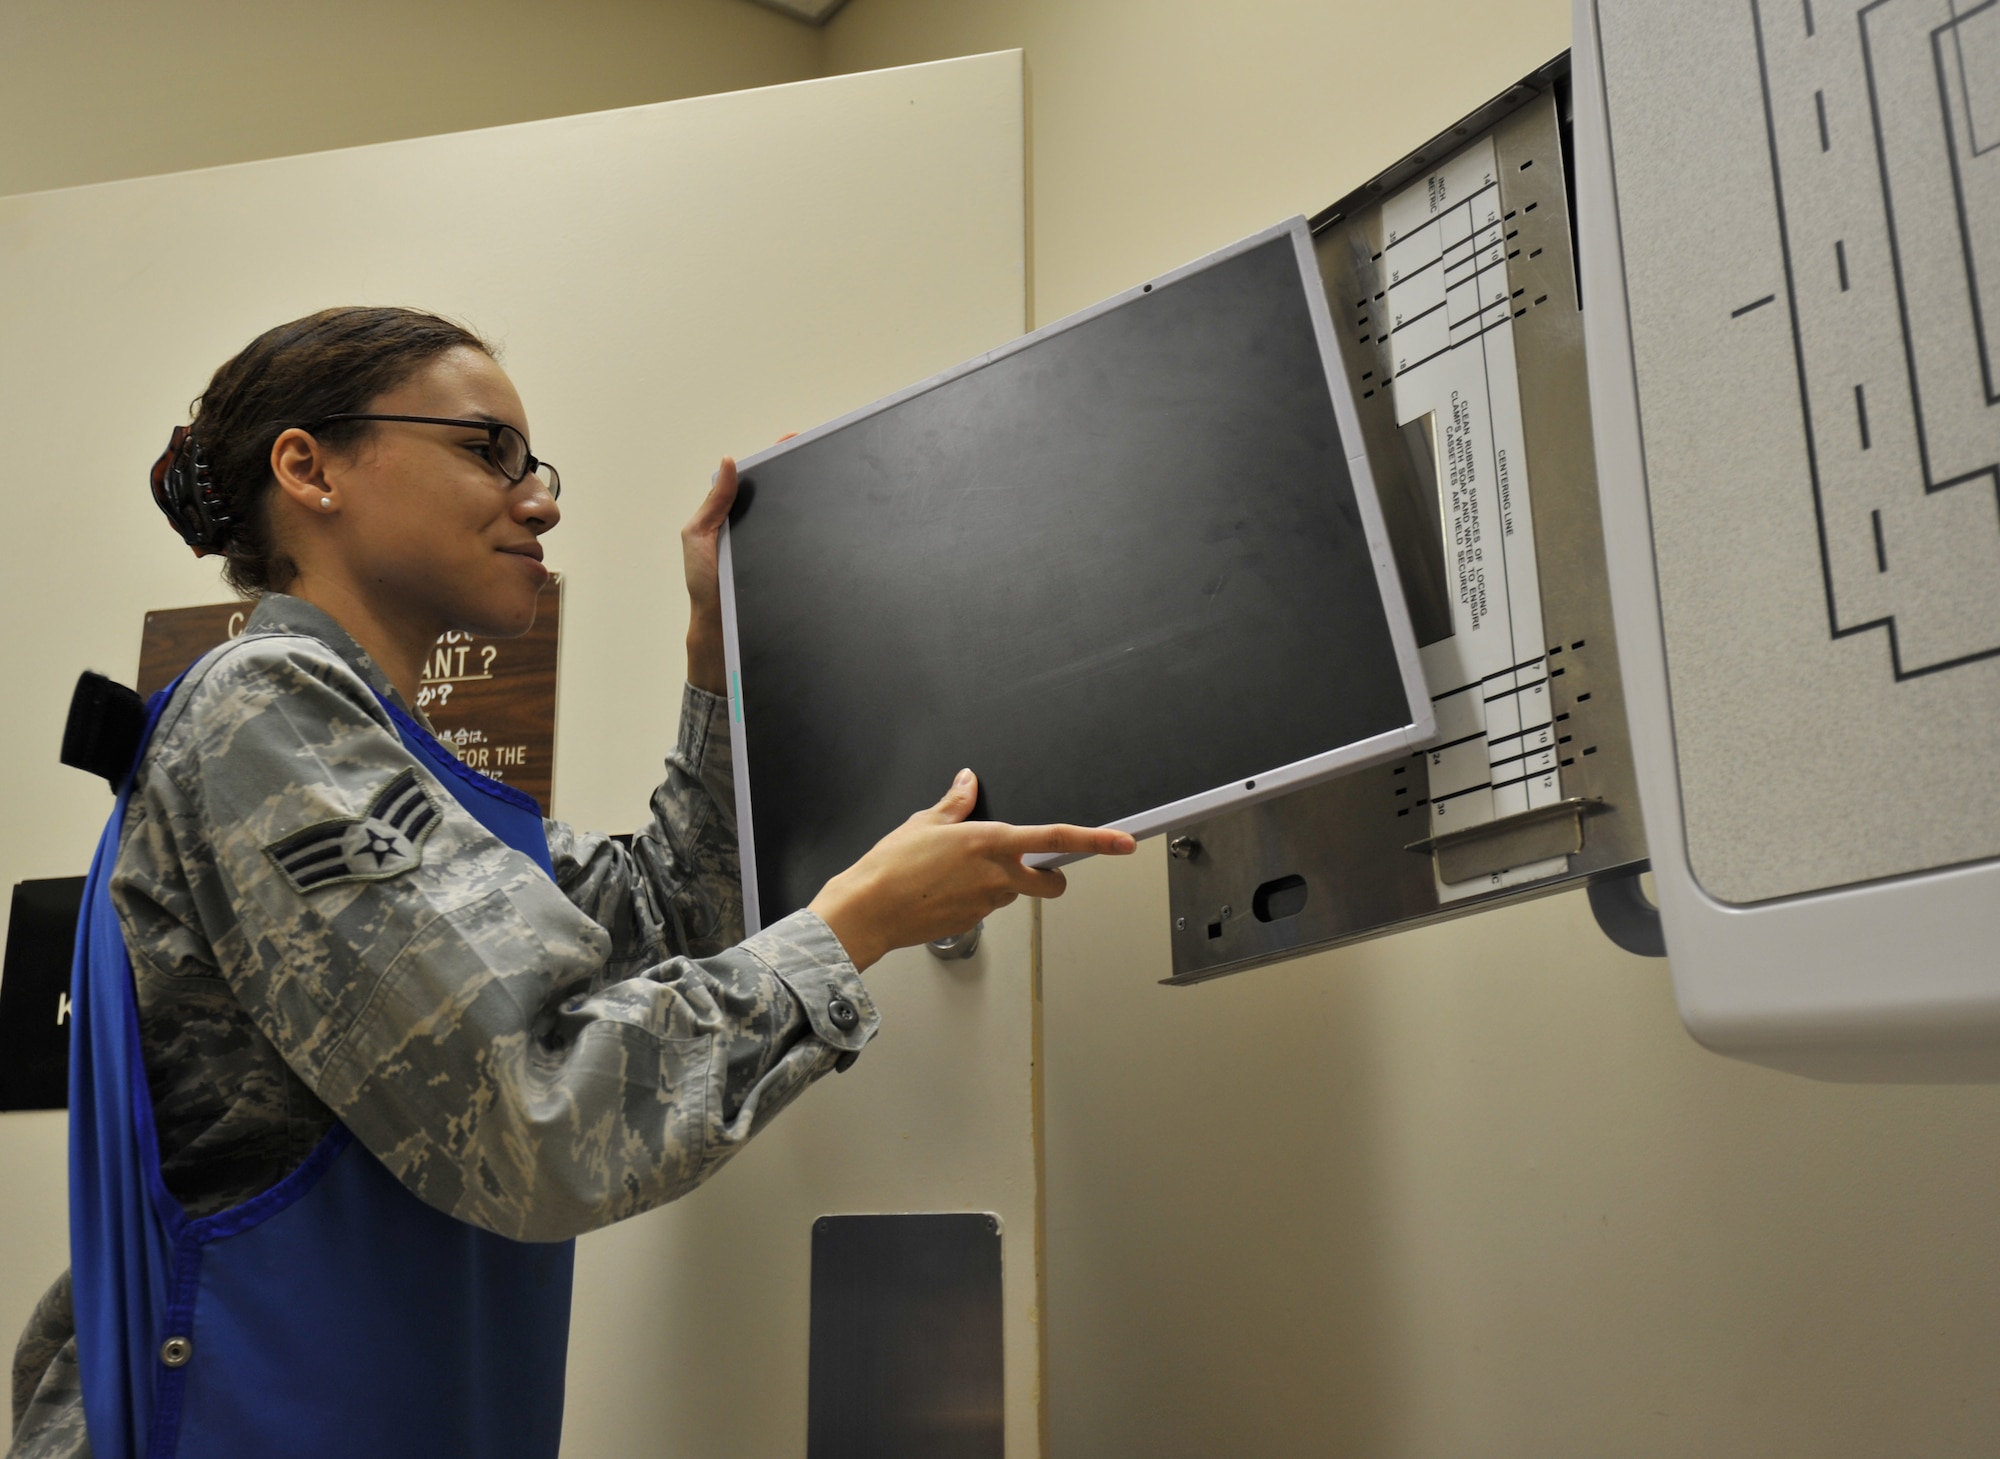 U.S. Air Force Senior Airman Natasha Bailey, 35th Surgical Operations Squadron diagnostic imaging technician, loads a radiography plate into an X-ray film holder Jan. 4, 2010; Misawa Air Base, Japan. After the X-ray is captured, the plate is scanned and the image is digitally transferred to a computer for viewing. (U.S. Air Force photo by Airman James B. Bauer/Released)